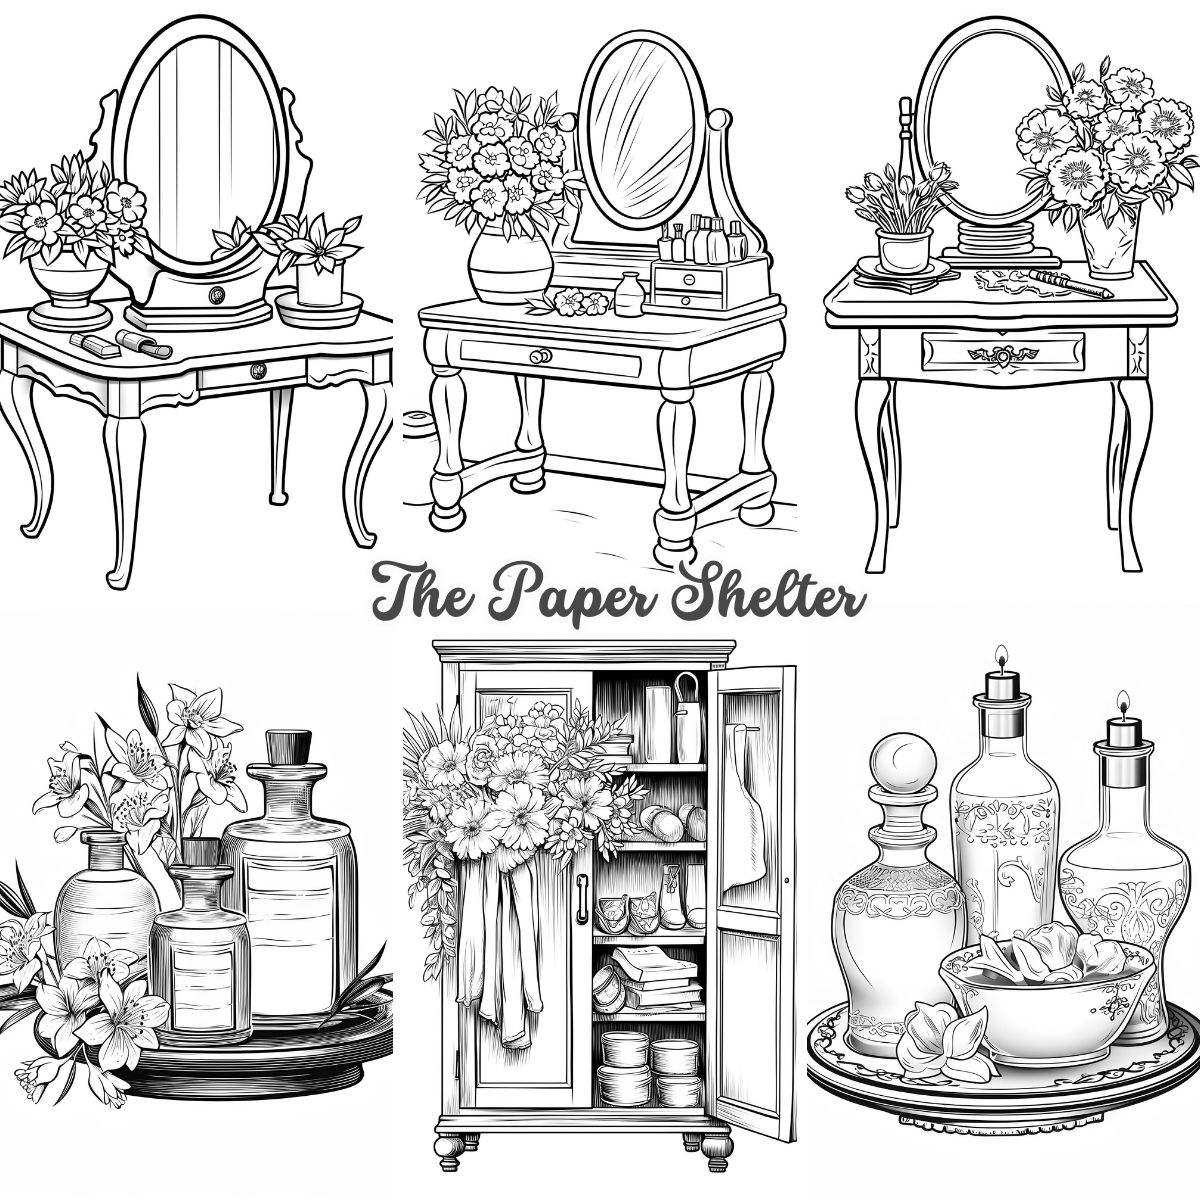 Beauty Stations - Digital Coloring Book - Click Image to Close